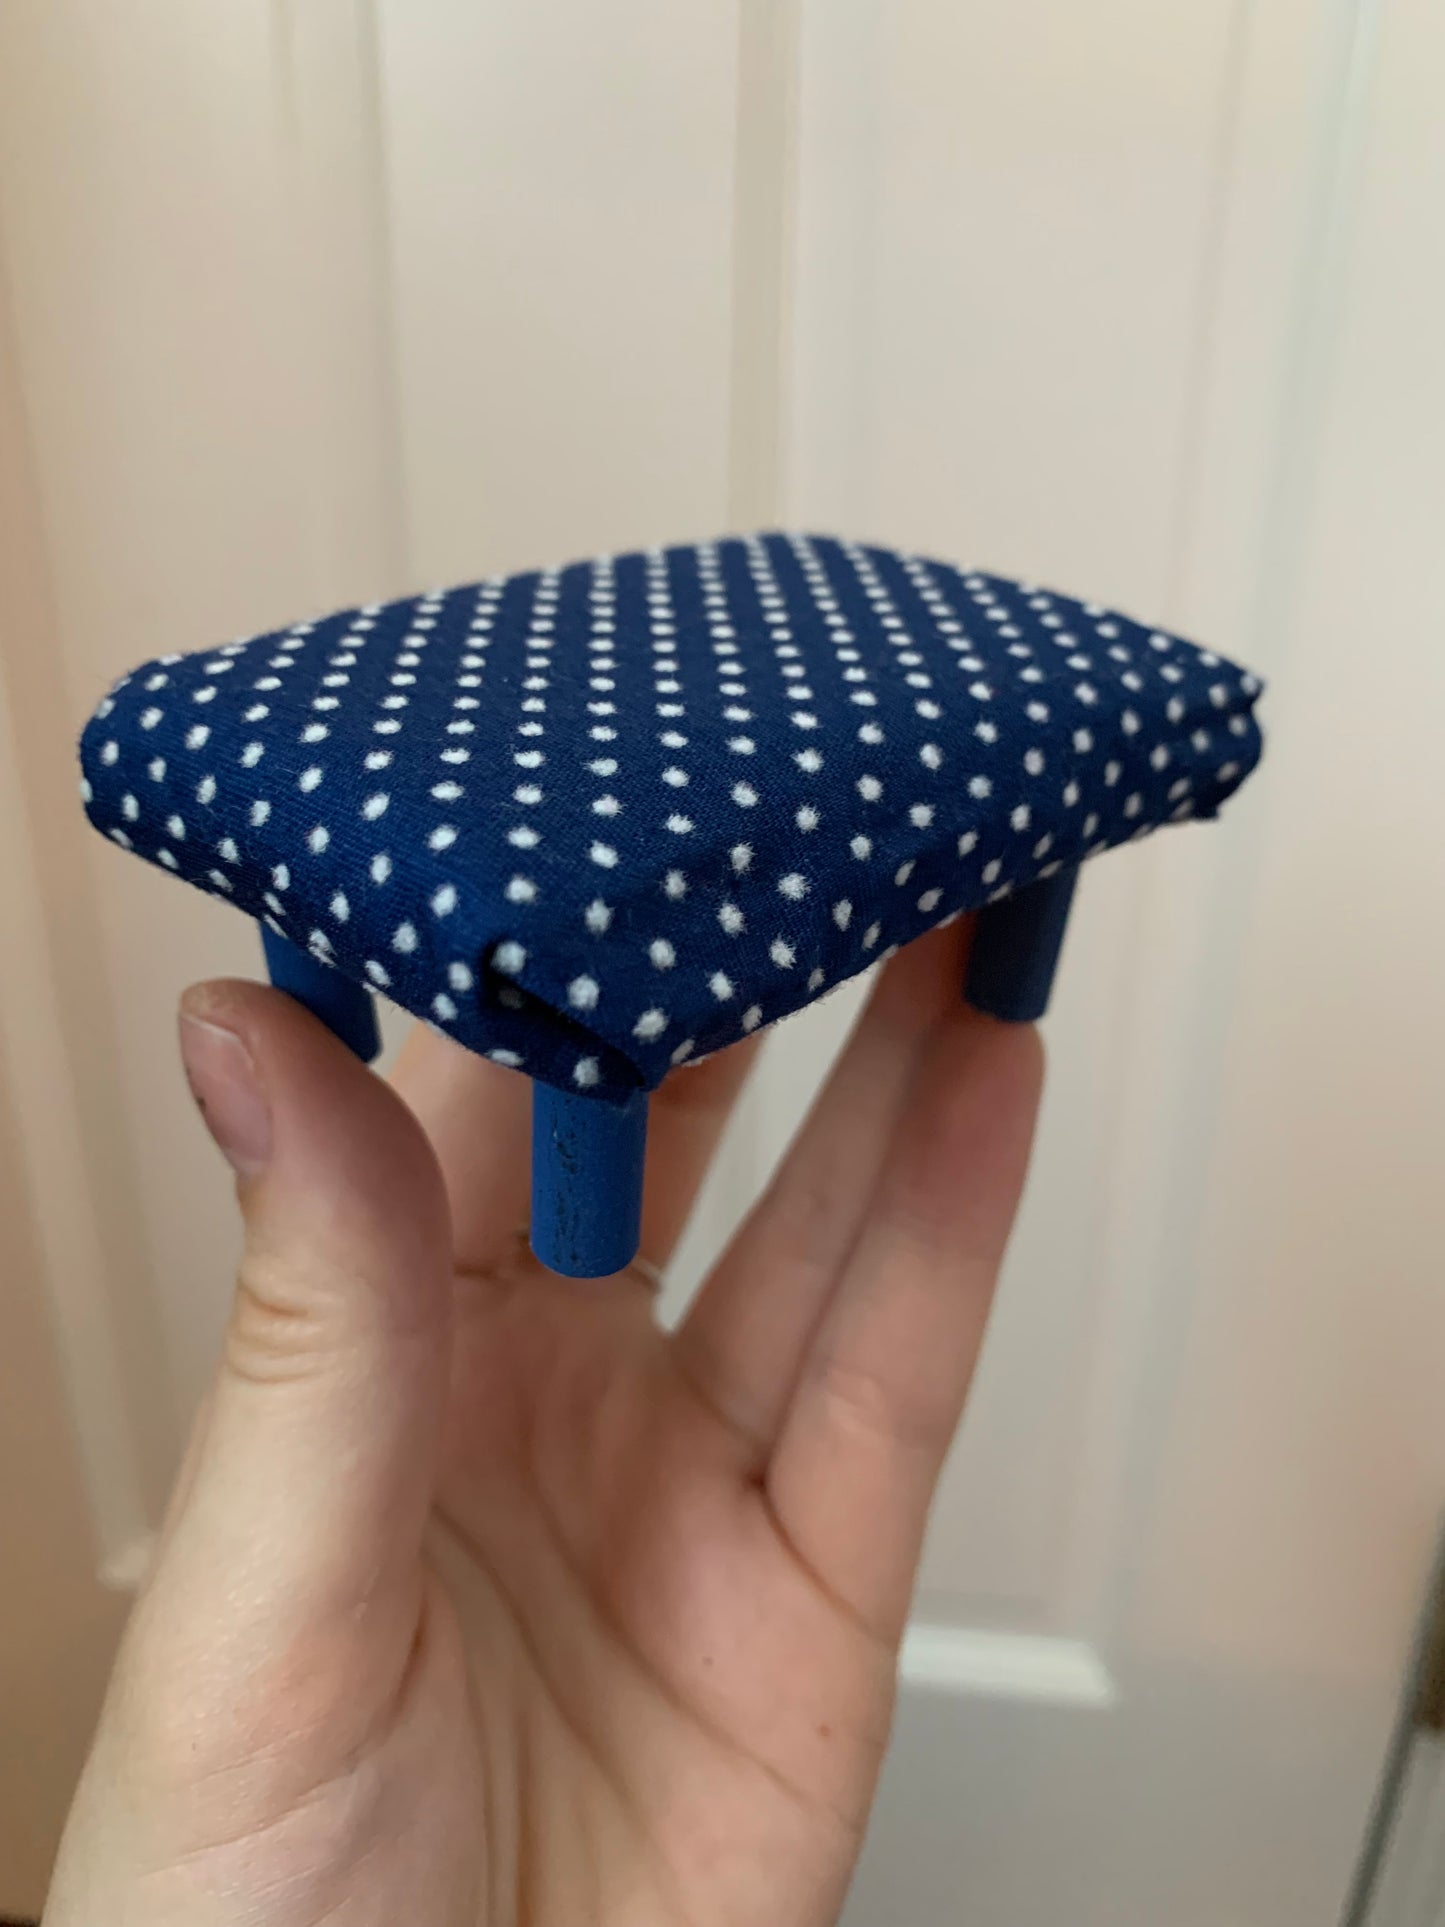 a miniature dollhouse ottoman, held in a hand for scale. This one is navy with white polkadots, with navy legs